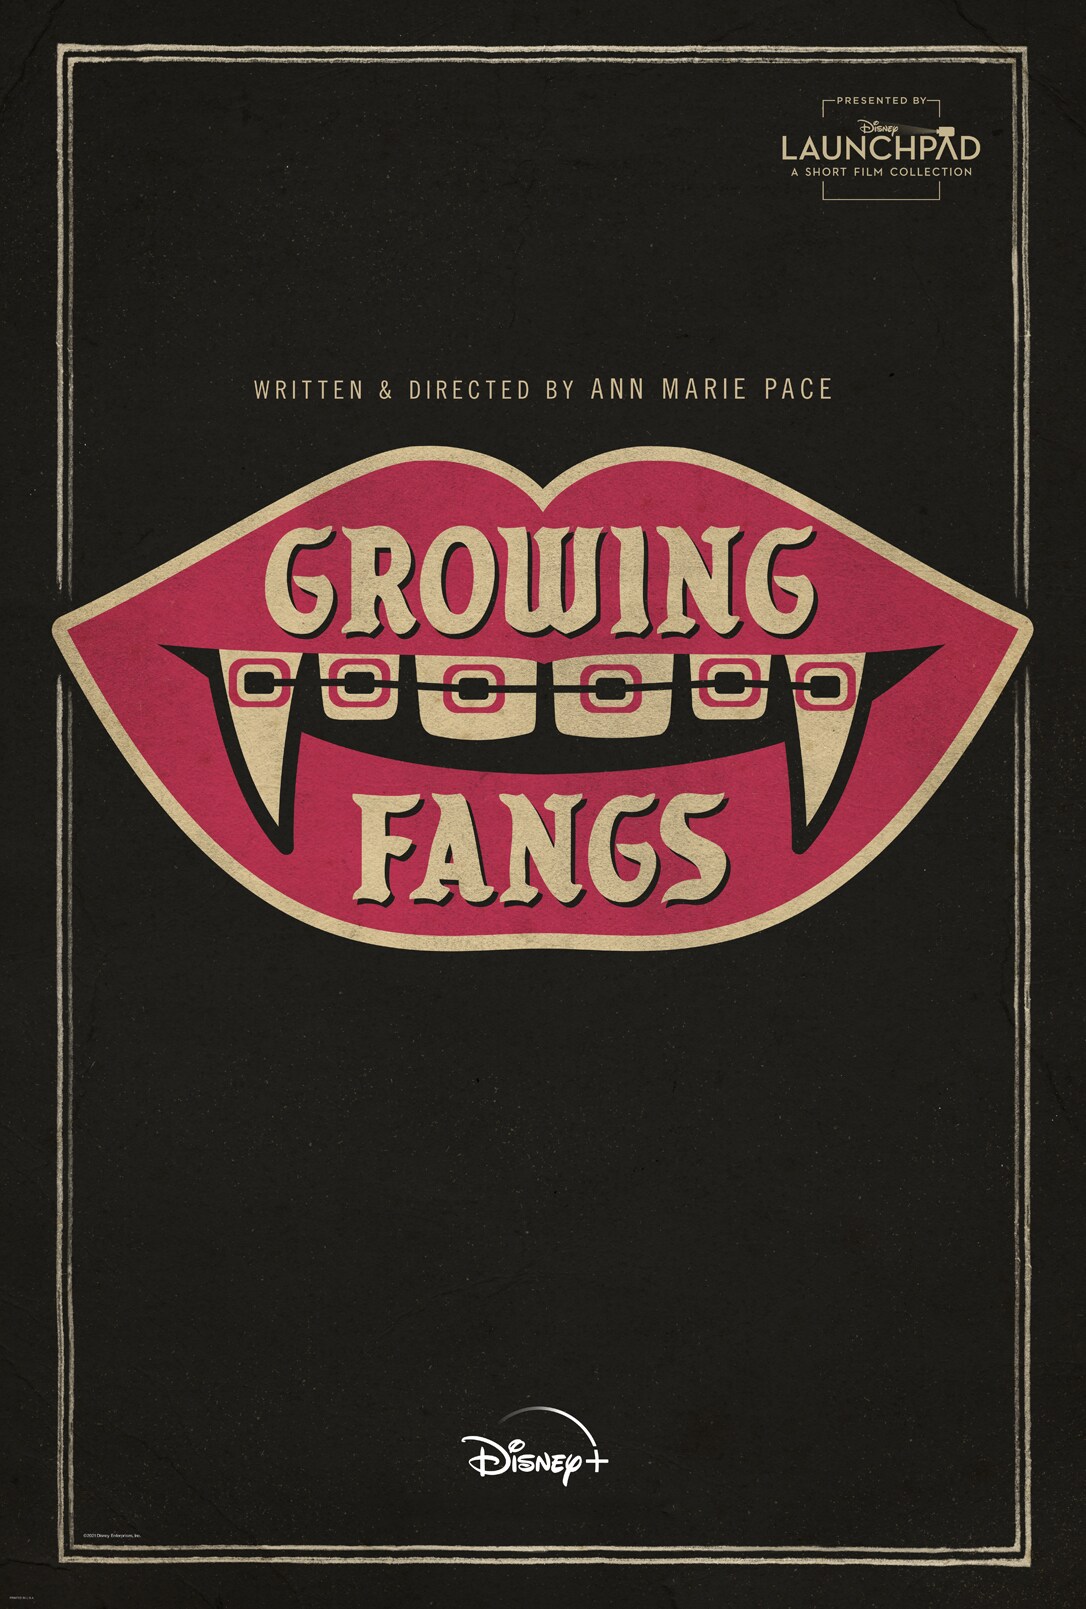 Logo for "Growing Fangs": A mouth with vampire fangs and braces